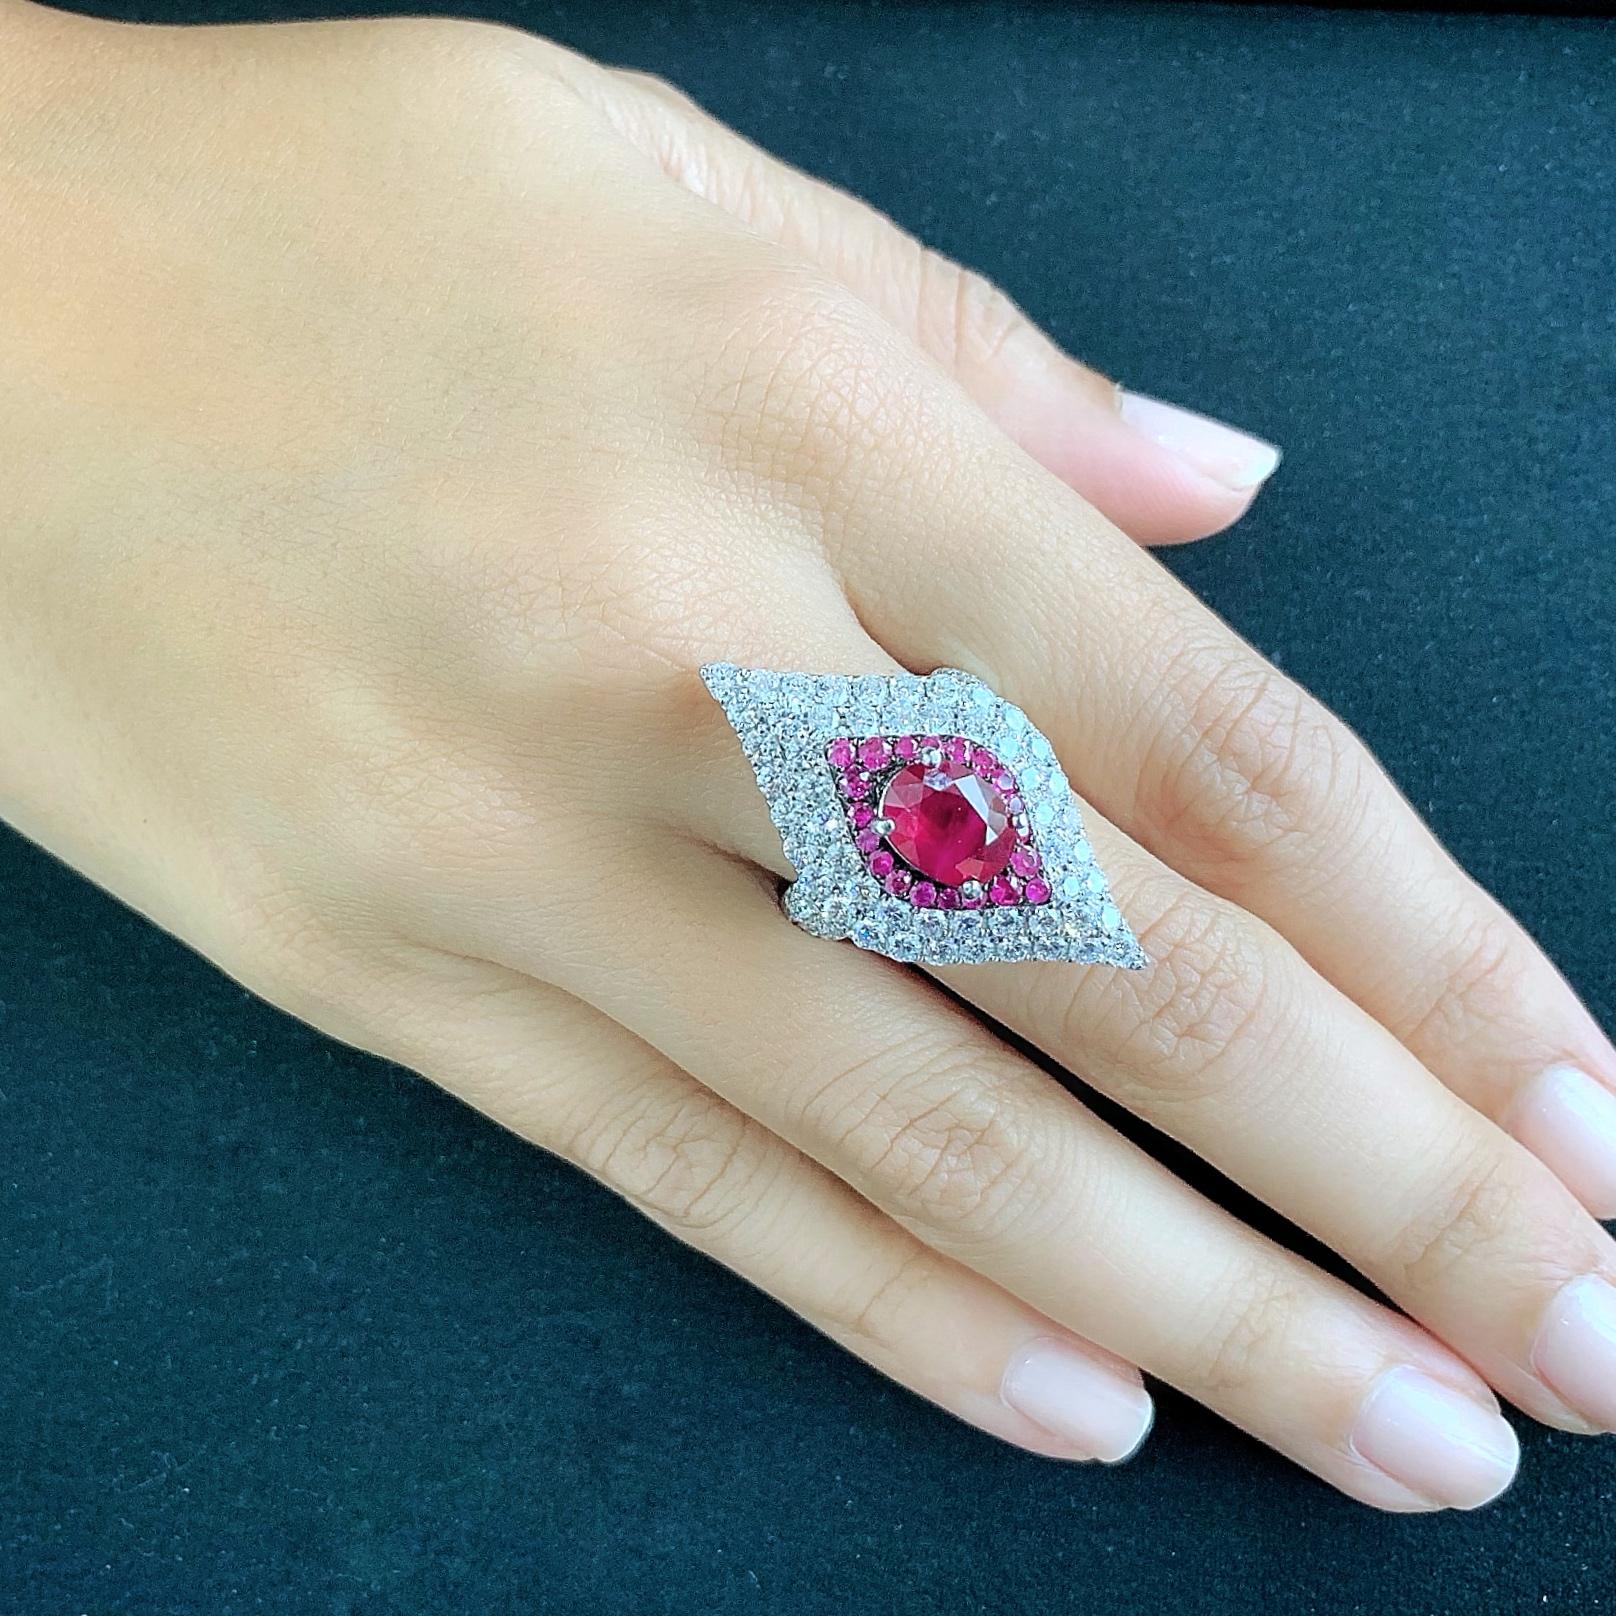 Butani's 18-karat white gold ring is encrusted with 3.3 carats of shimmering white diamonds, 0.58 carats of rubies and centered with an 2.33 carat oval-cut ruby.  Crafted in a sharp silhouette, the ring is size US 7.  For other sizes, please contact